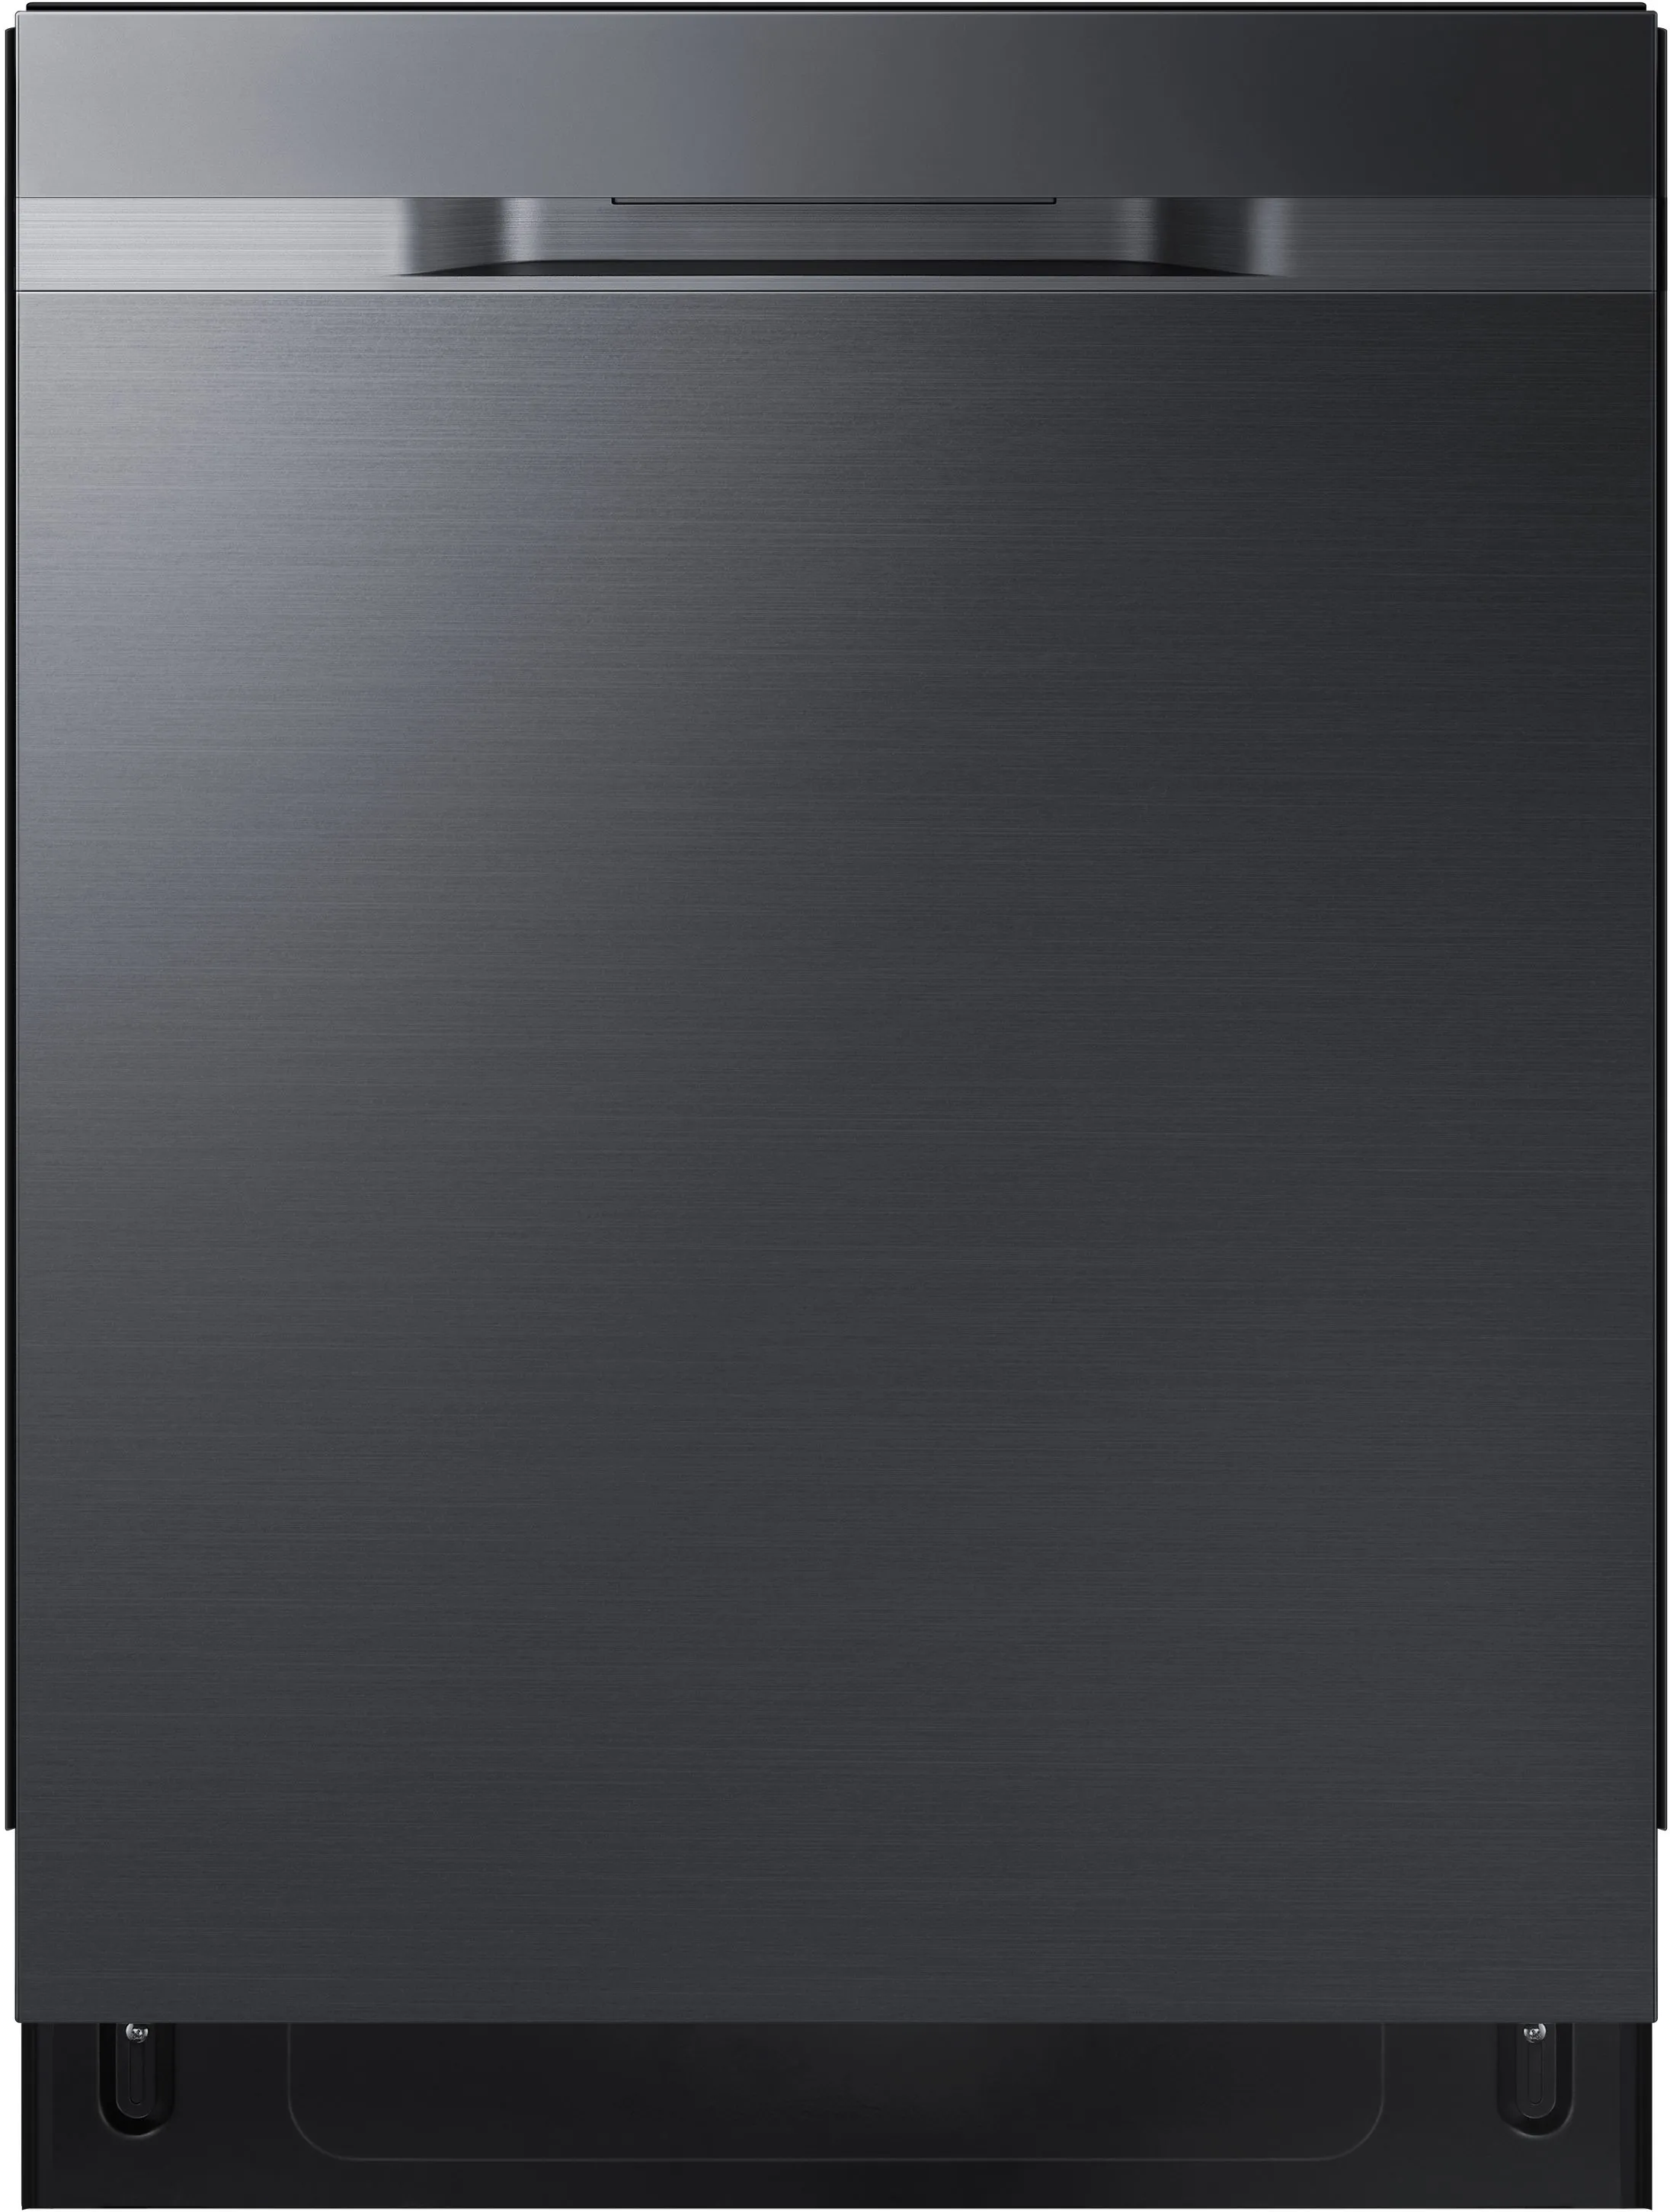 Front view of Samsung DW80R5060UG black stainless steel dishwasher 